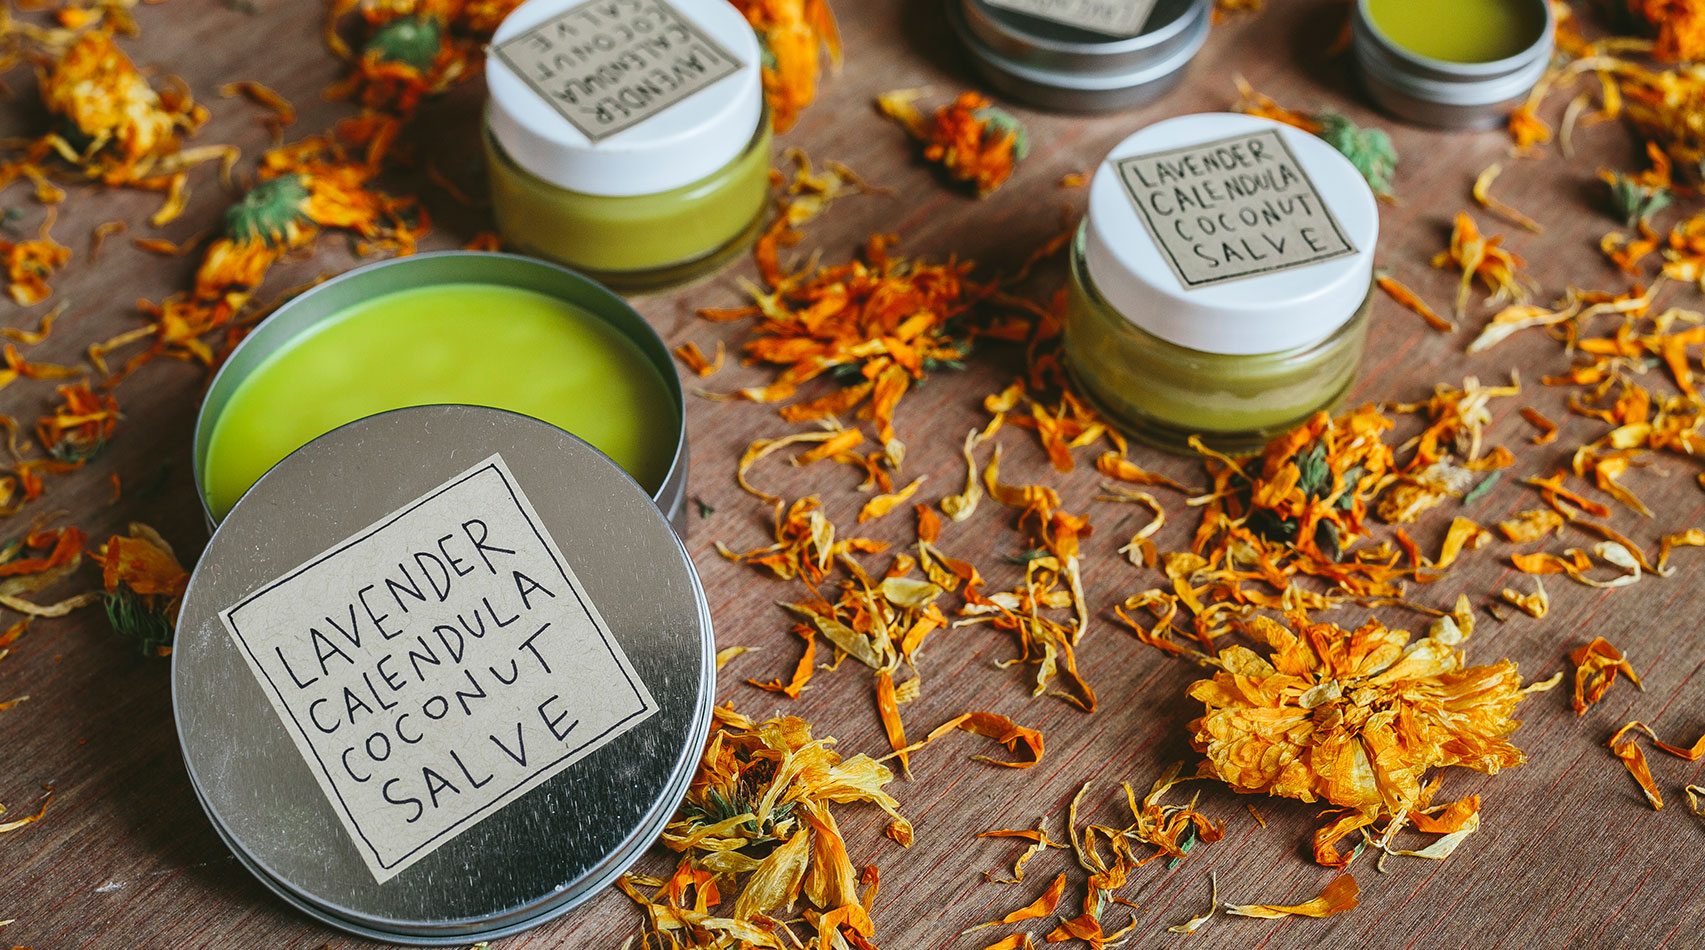 Labeled Lavender Calendula Coconut Salve containers